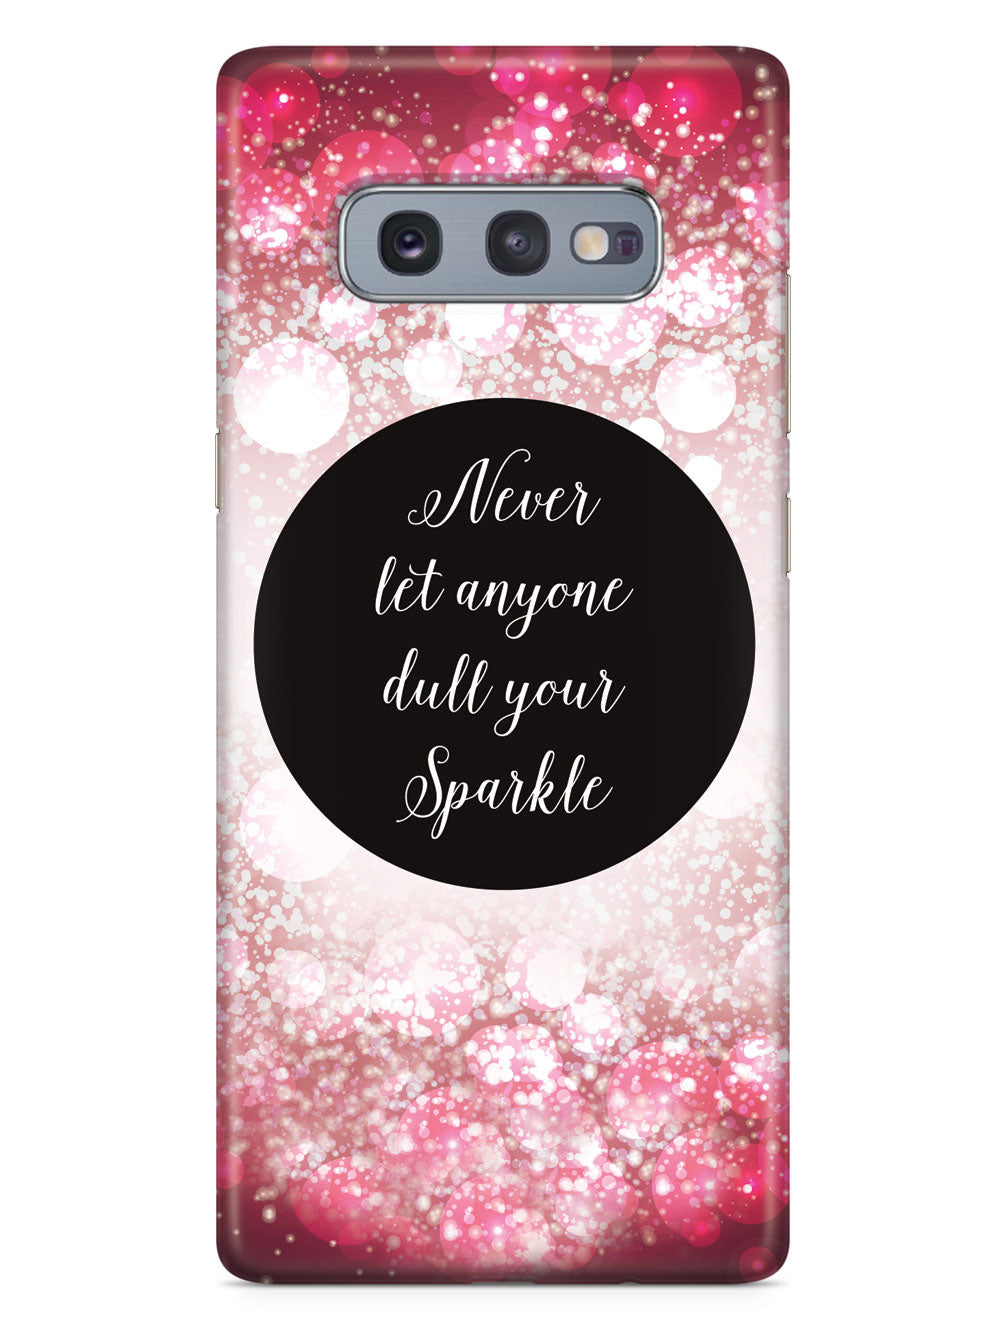 Dull Your Sparkle Case